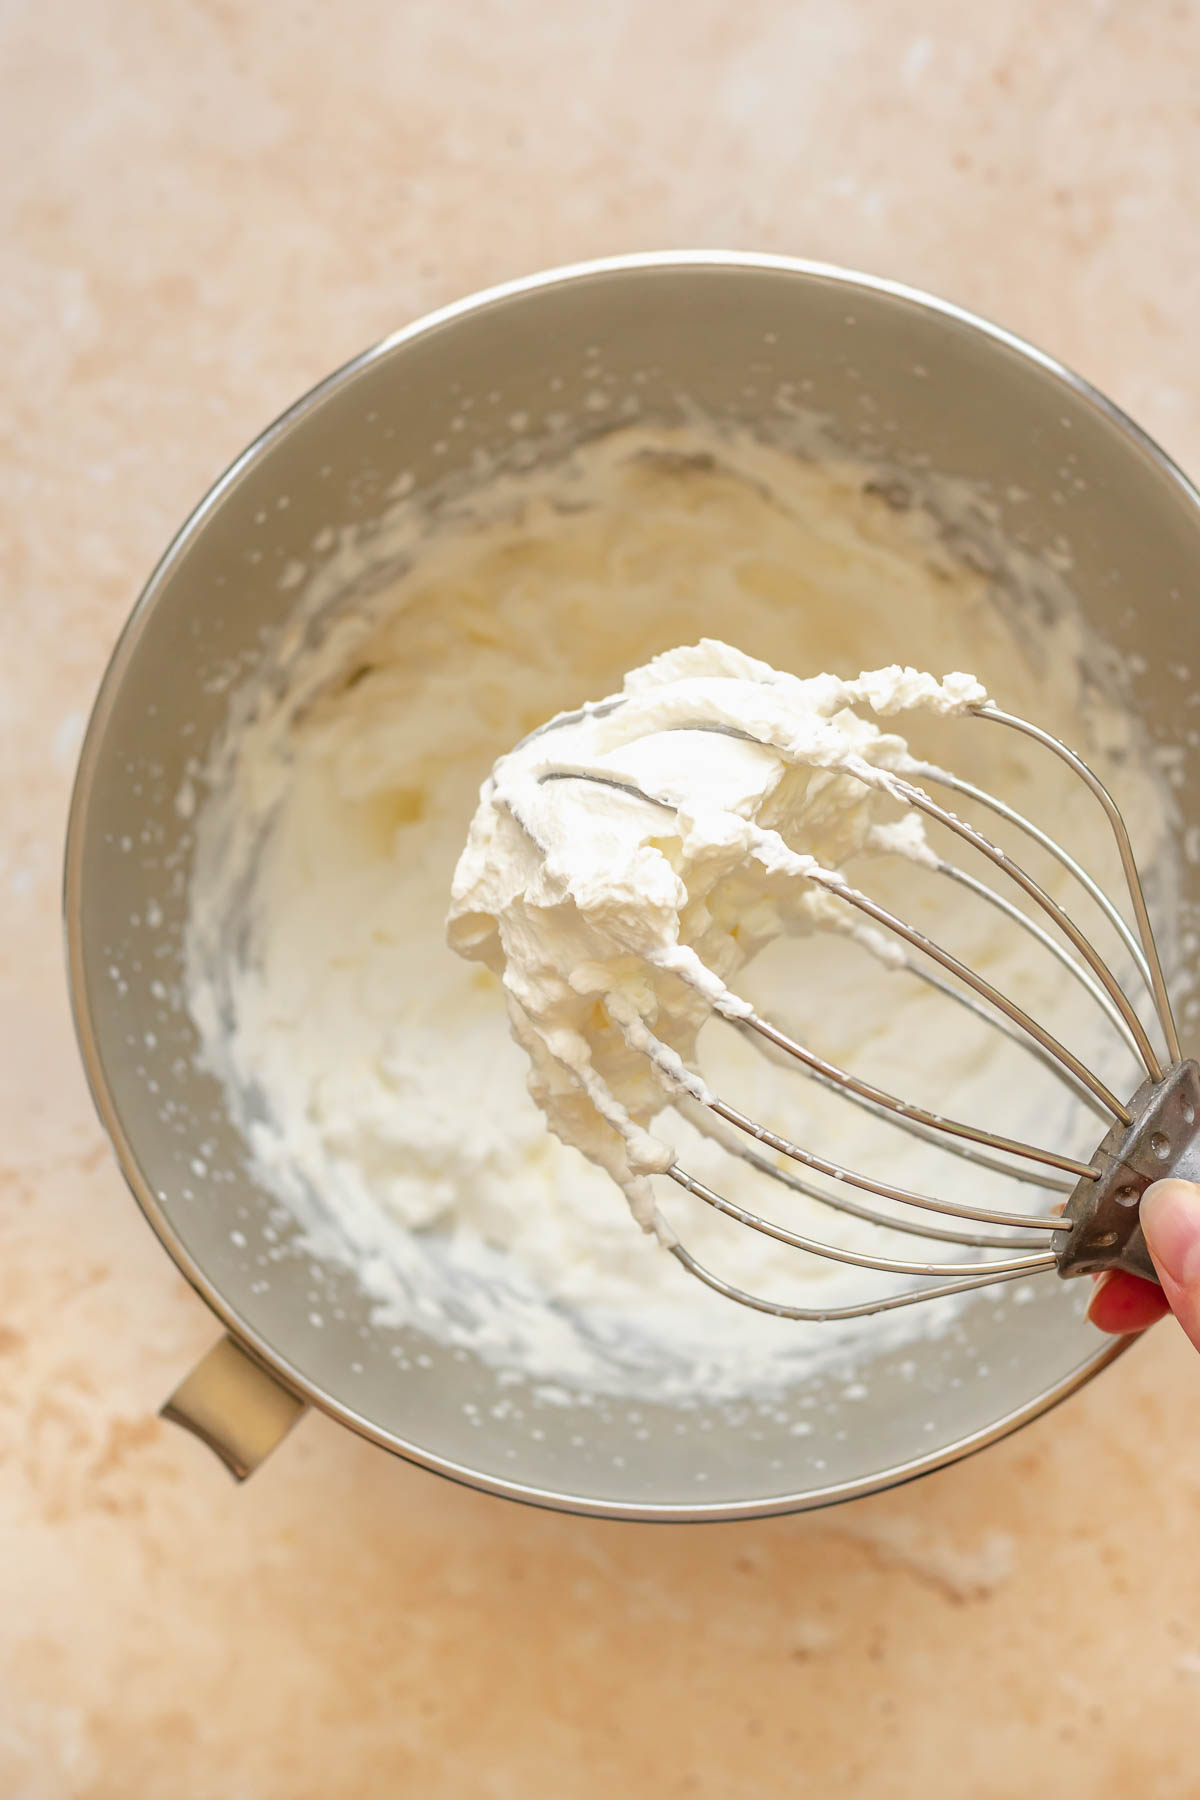 Stiff peaks of whipped cream on the tip of a whisk.